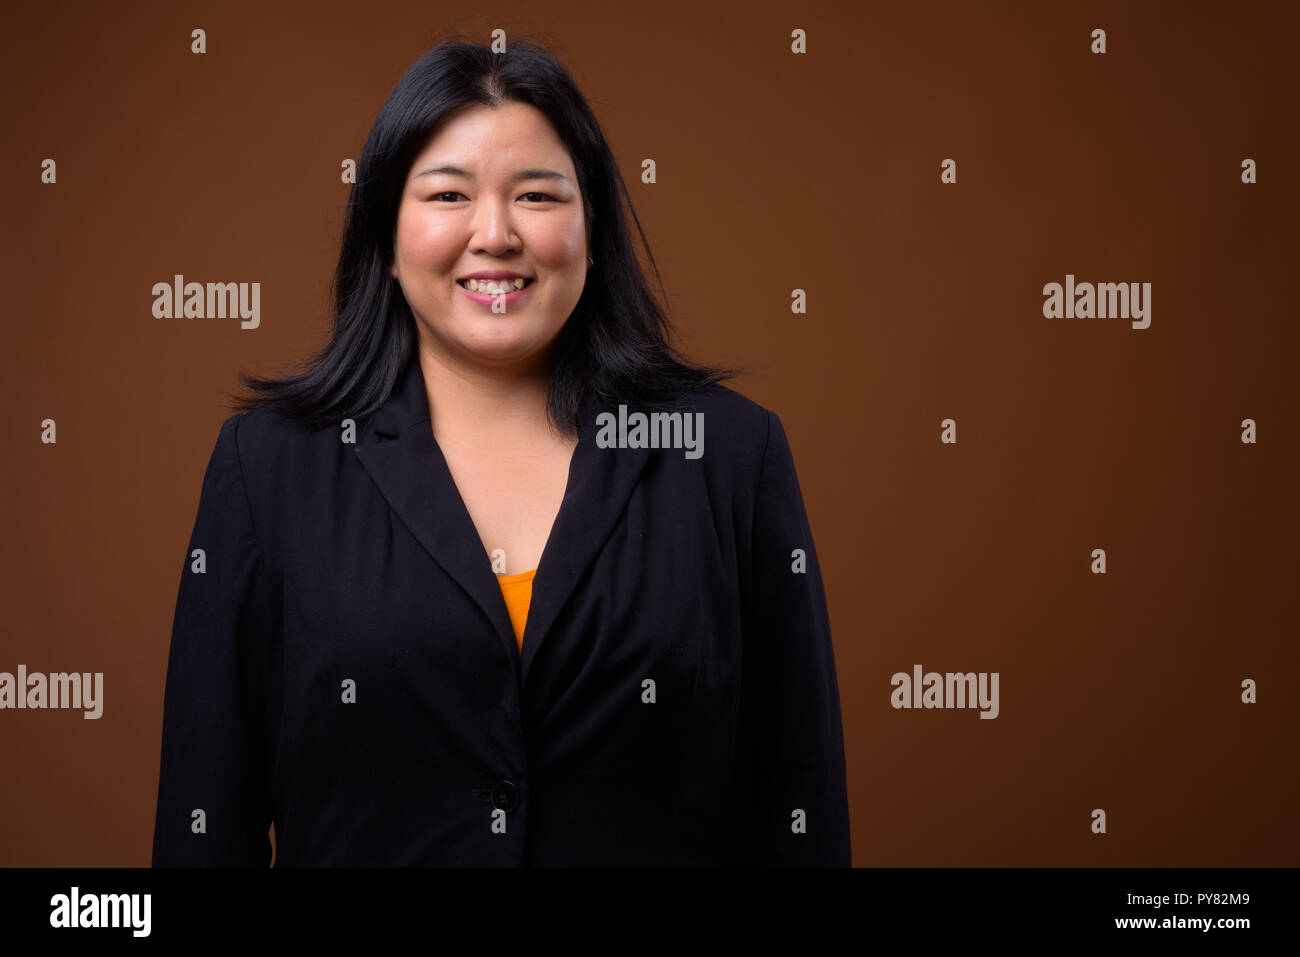 Portrait of beautiful overweight Asian businesswoman smiling Stock Photo